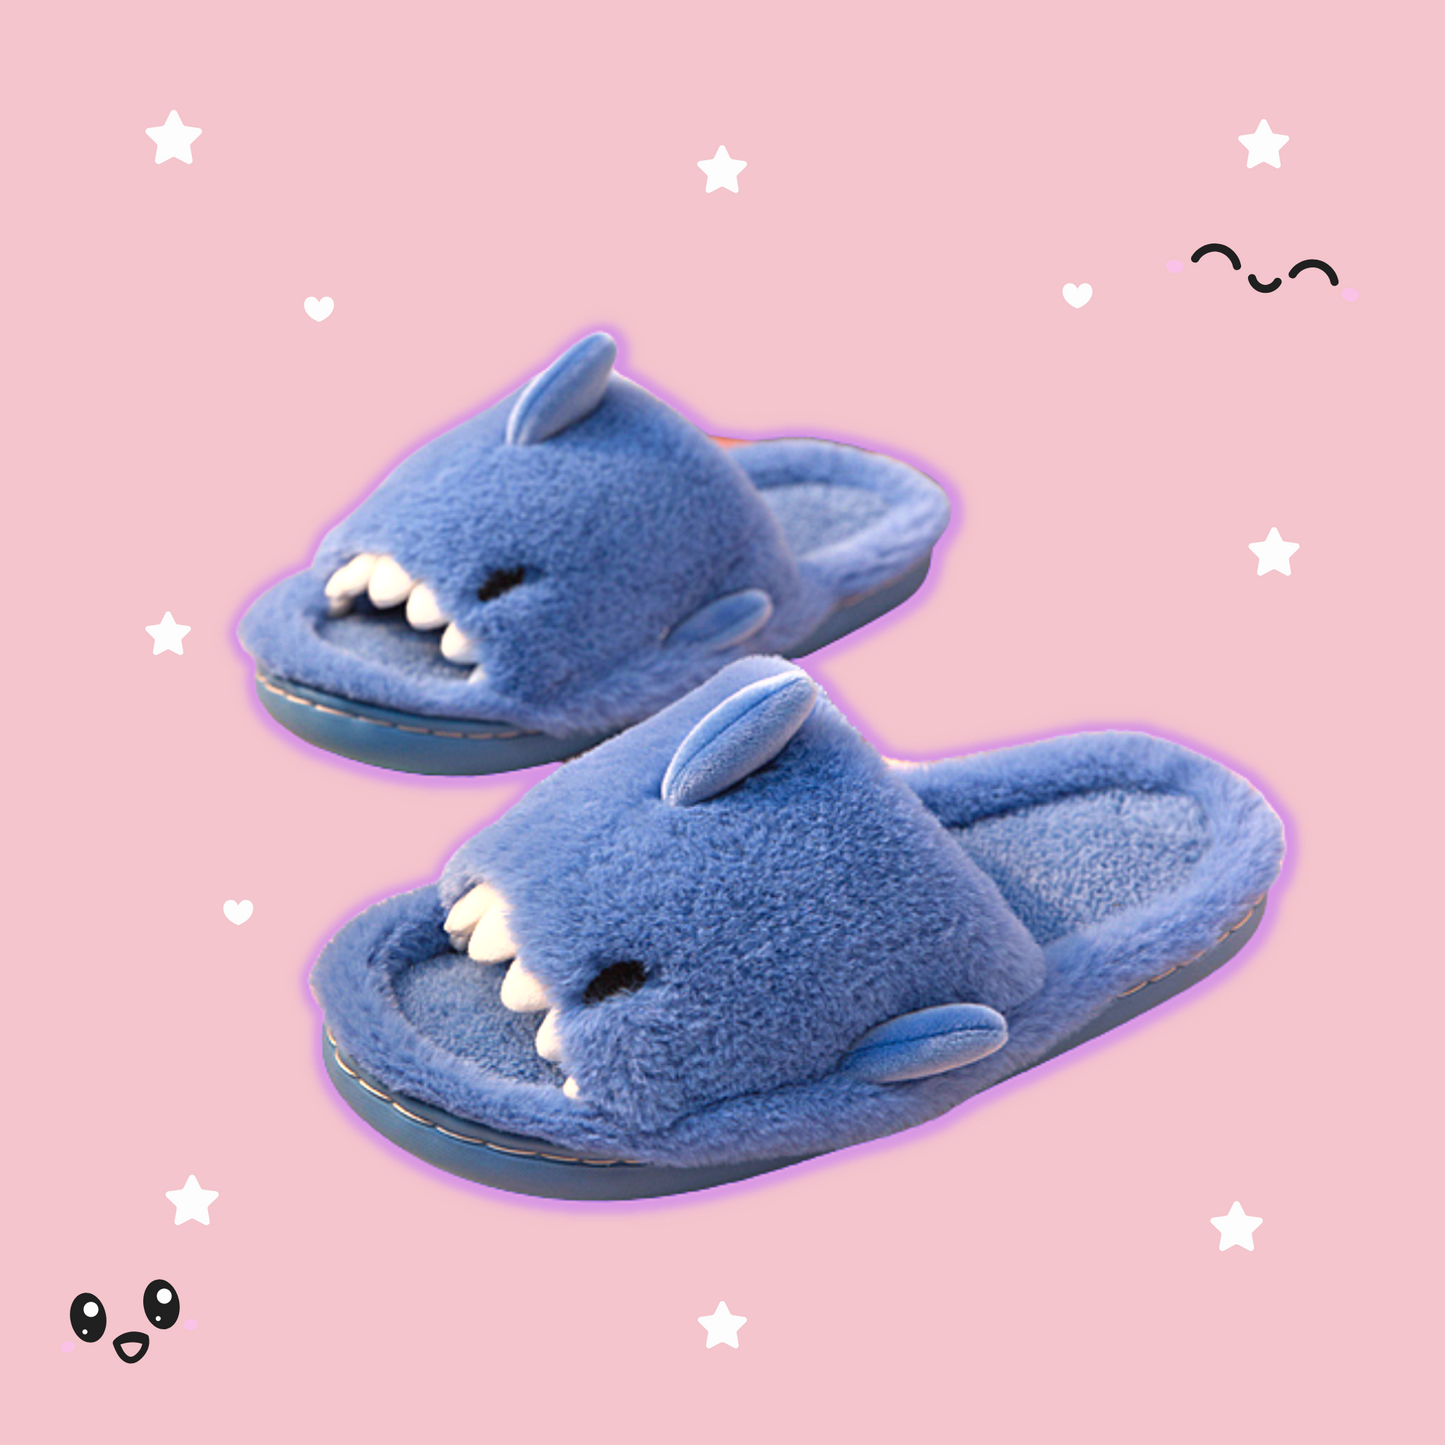 Shop Comfyt: Comfy Plush Shark Slippers - Shoes Goodlifebean Giant Plushies